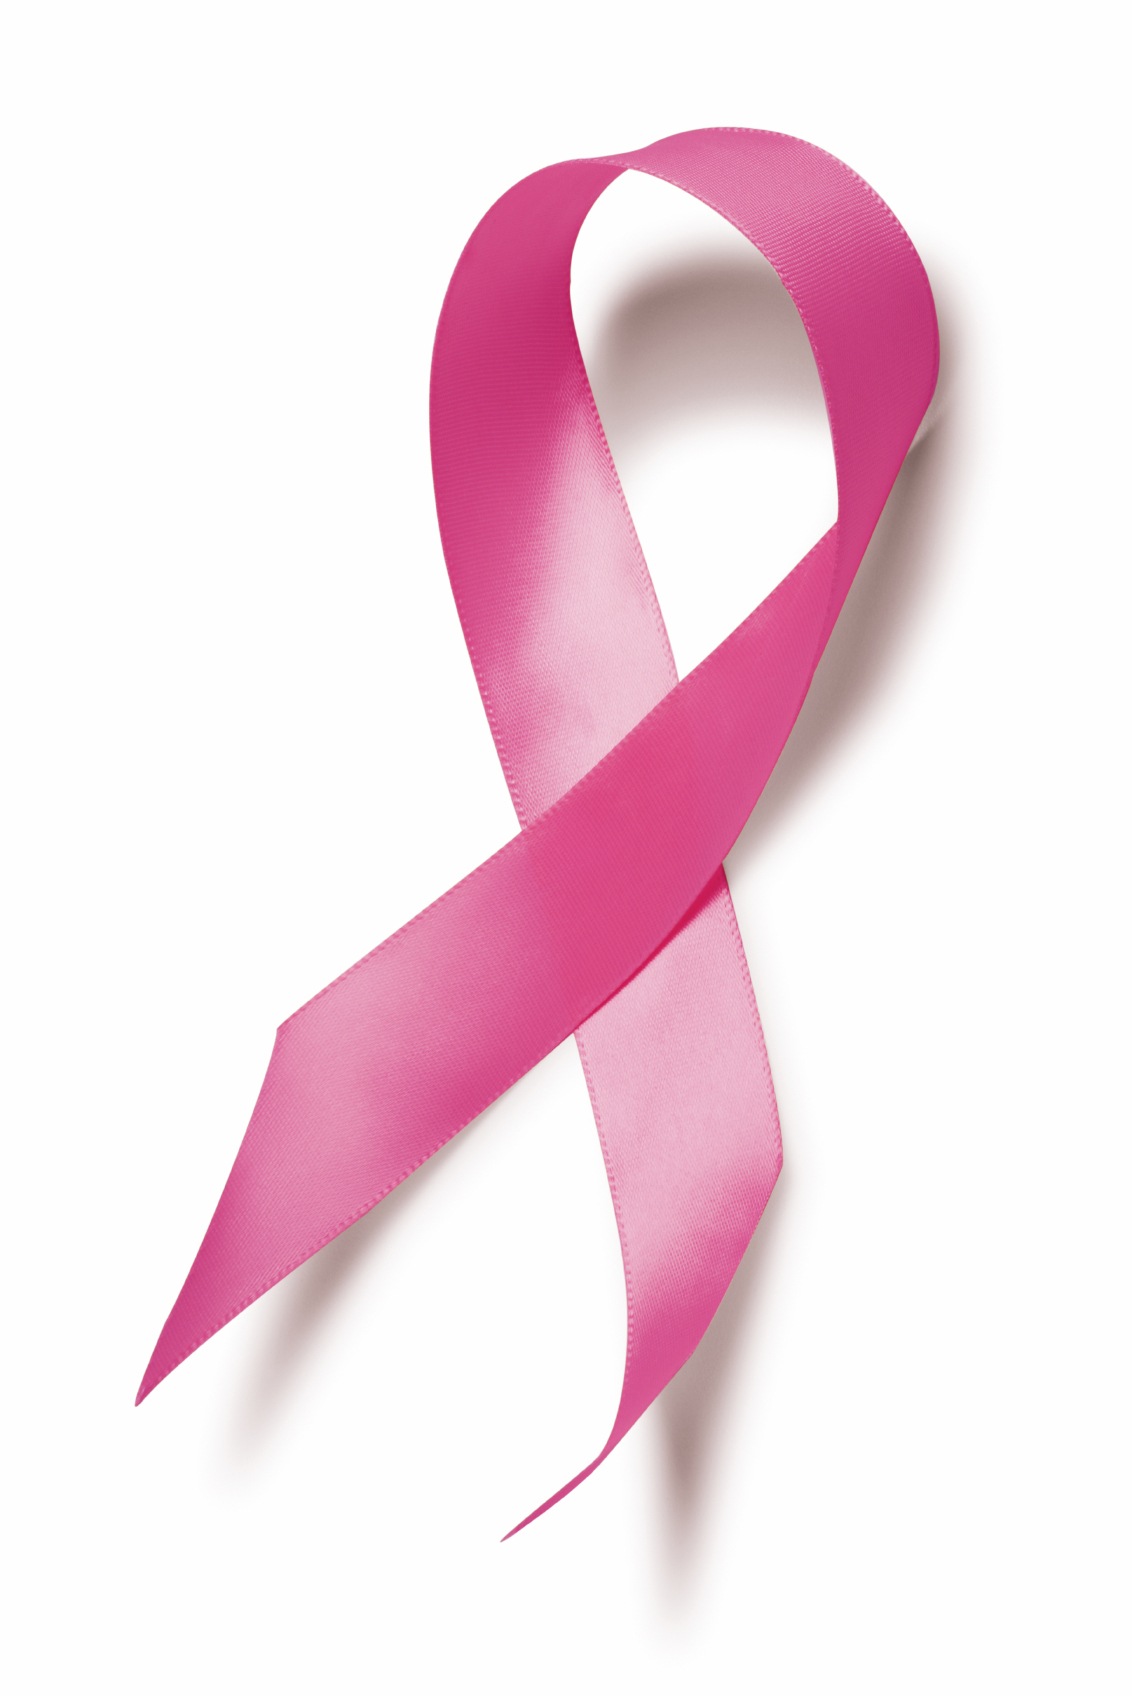 The Good News About Breast Cancer and Mammogram Encouragement